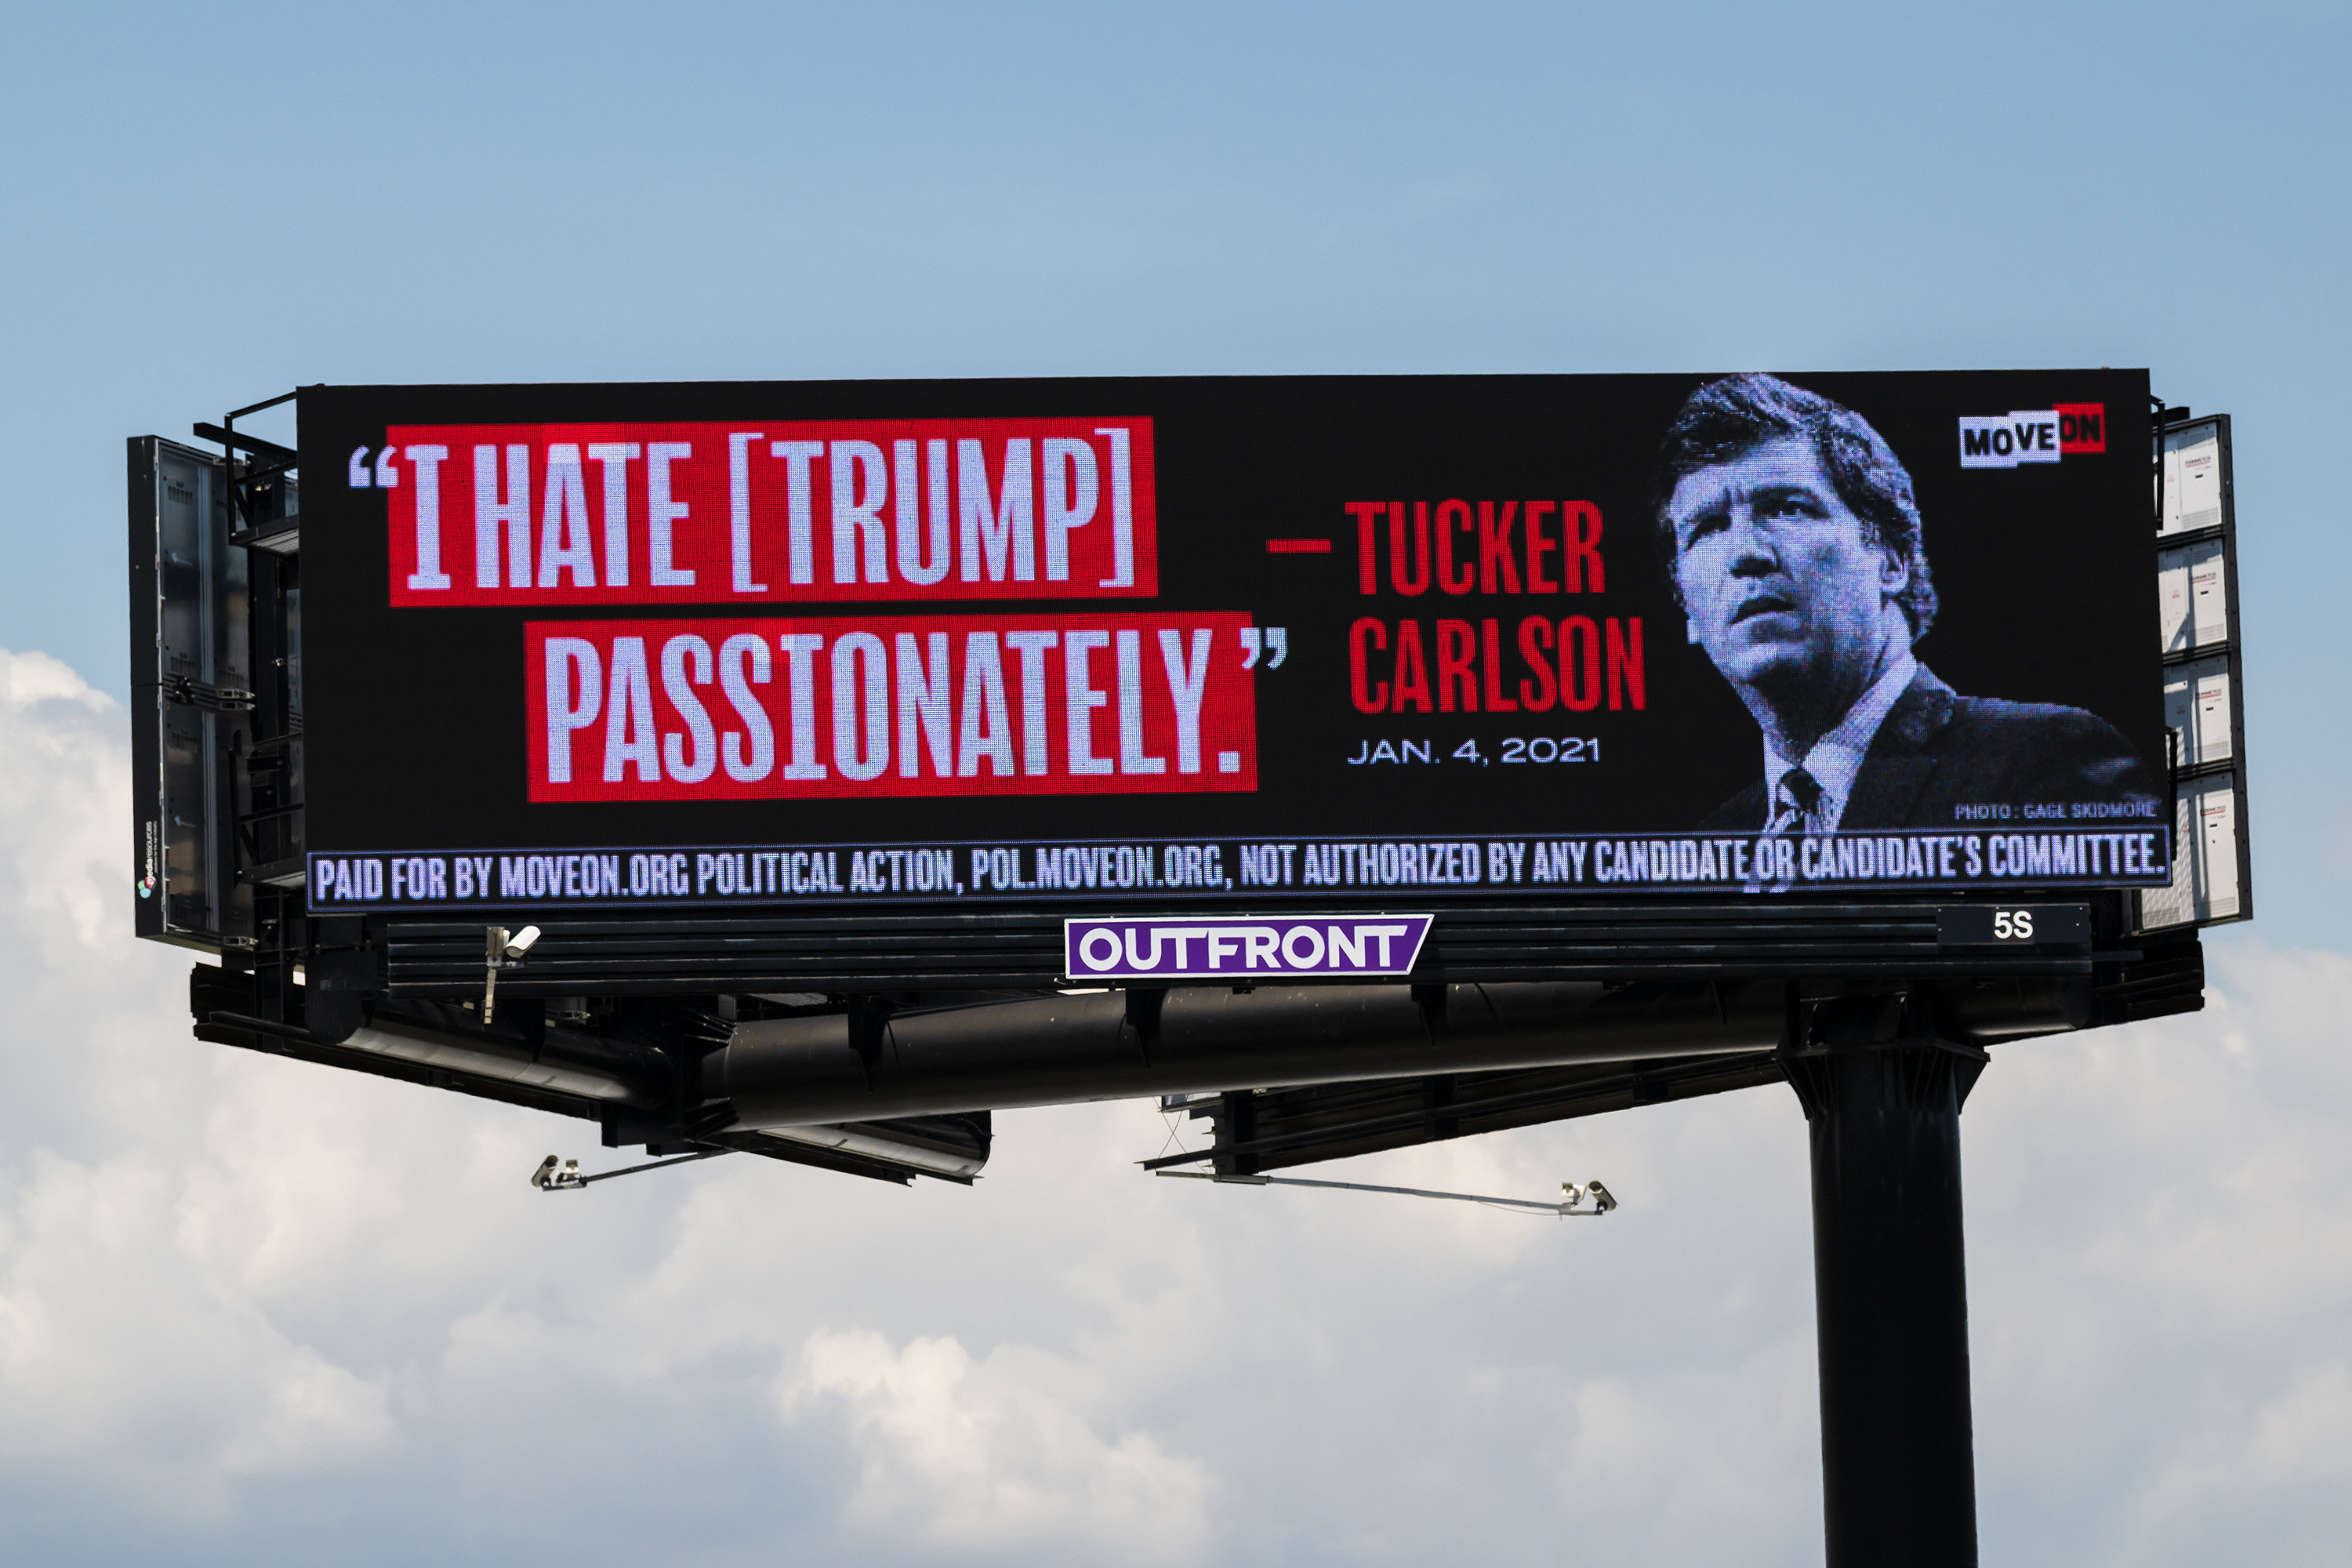 A billboard on a highway close to Mar-a-Lago, Donald Trump’s Florida residence, displays former Fox News host Tucker Carlson’s private text message about Trump, on April 3, made public in court filings. Photo: TNS